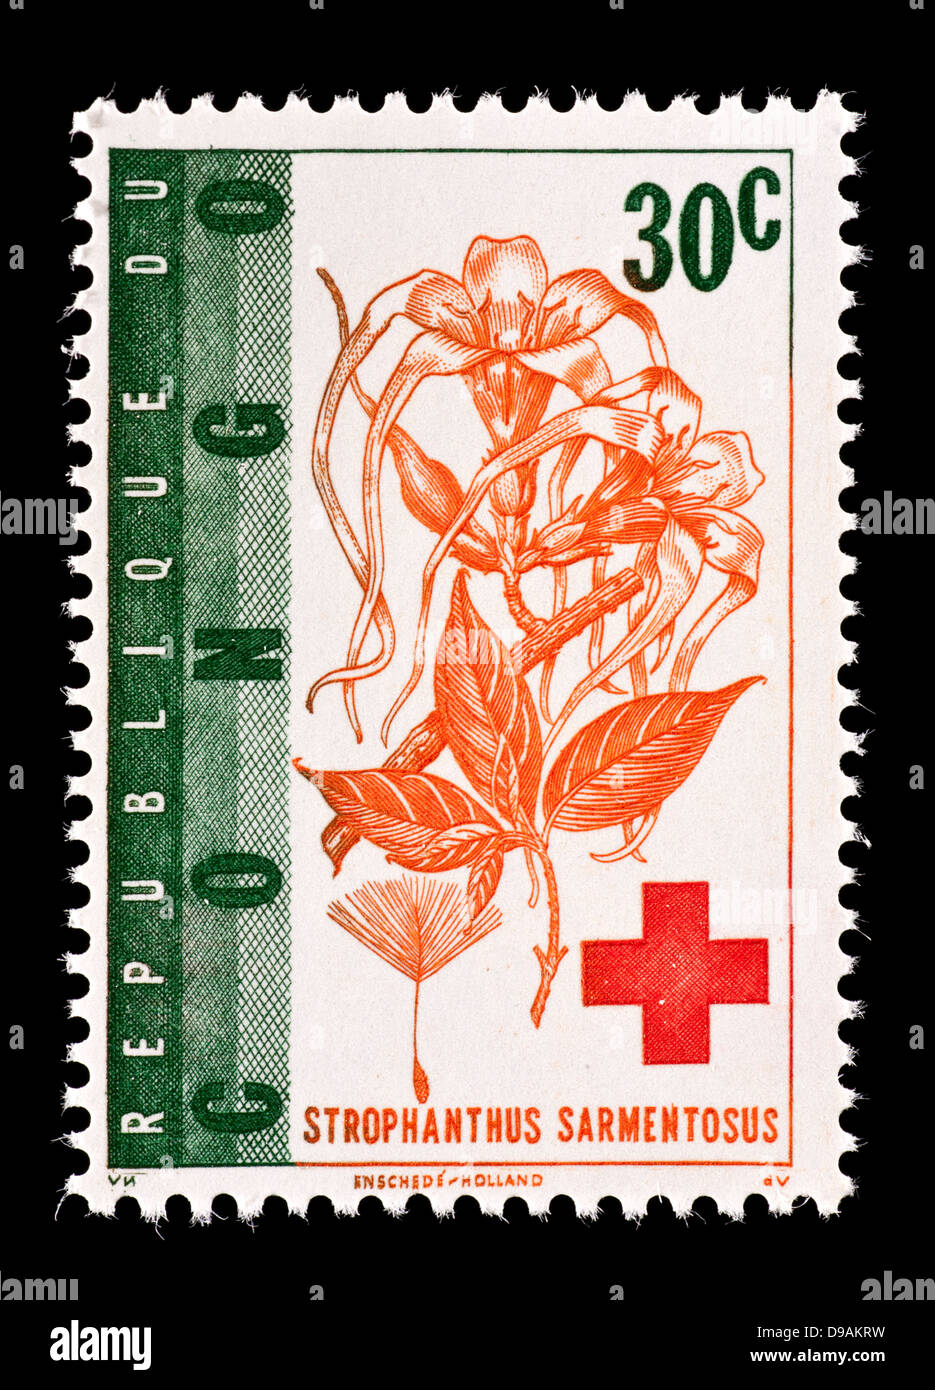 Postage stamp from the Congo Democratic Republic depicting dogbane (Strophanthus sarmentosus),  for the International Red Cross. Stock Photo